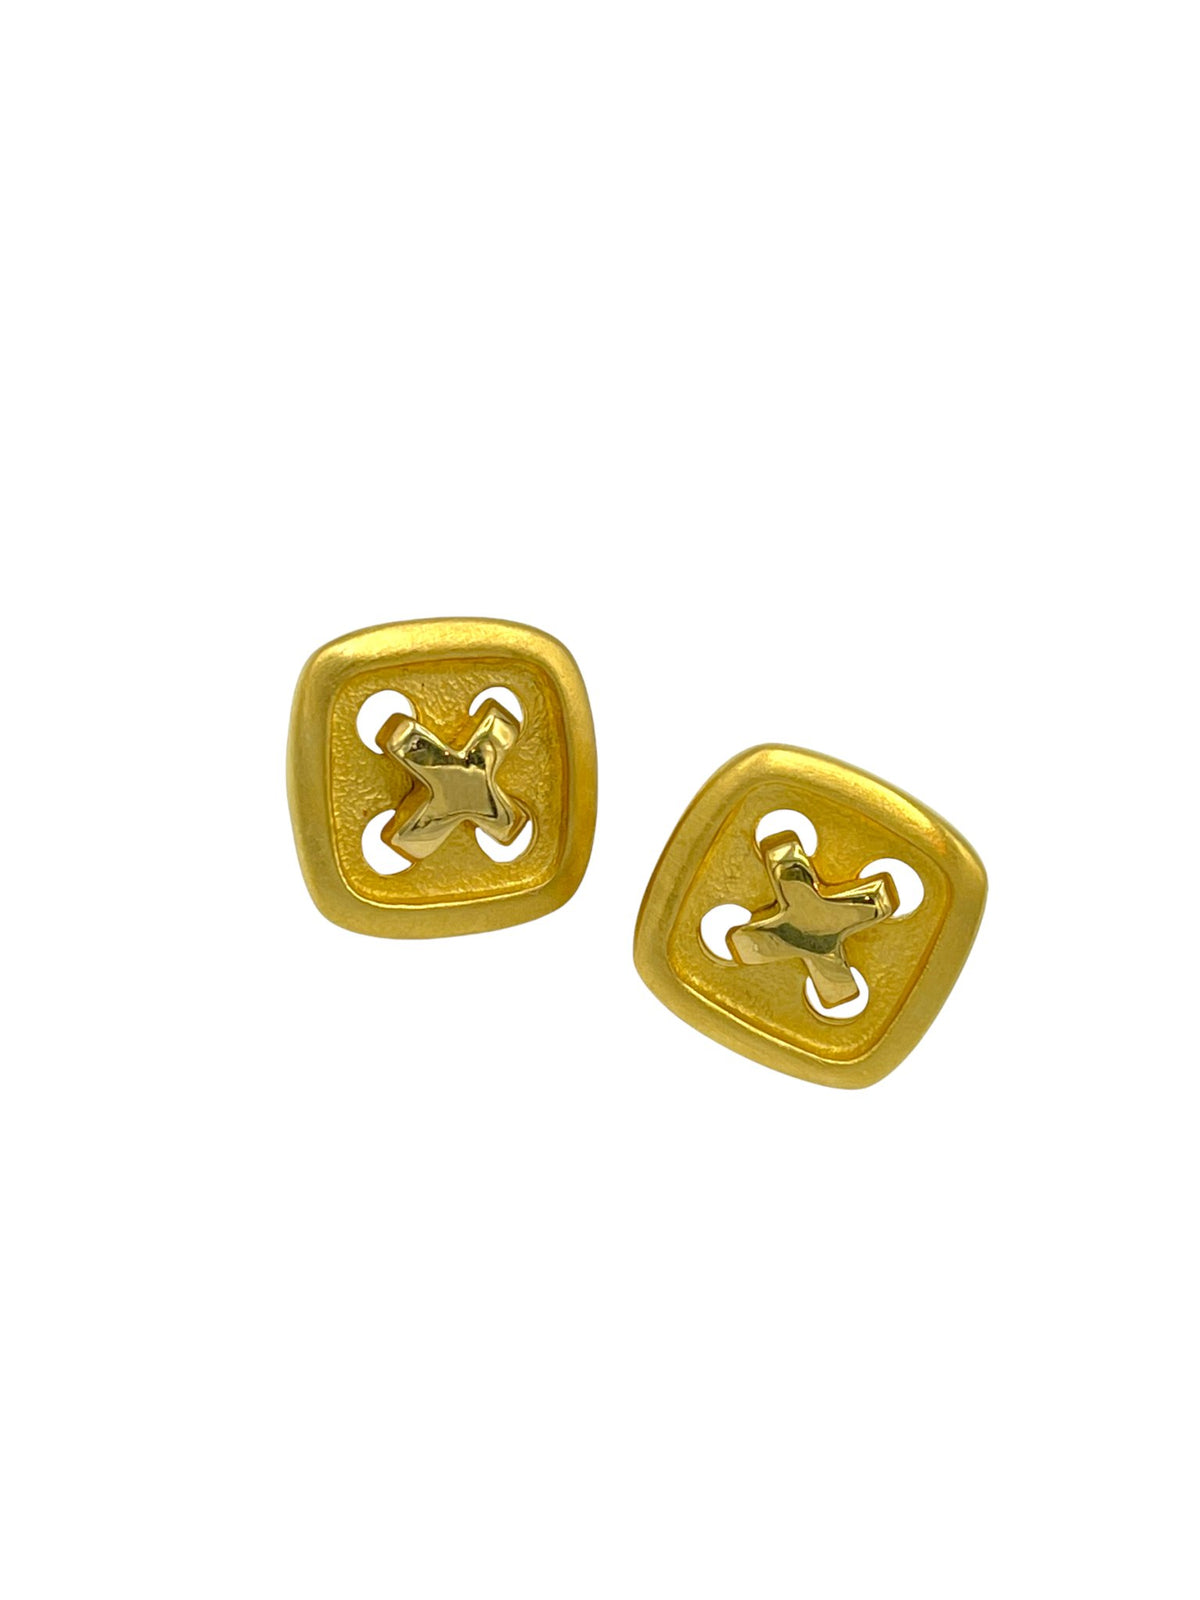 Givenchy Matt Gold Square Button Petite Vintage Pierced Earrings - 24 Wishes Vintage Jewelry